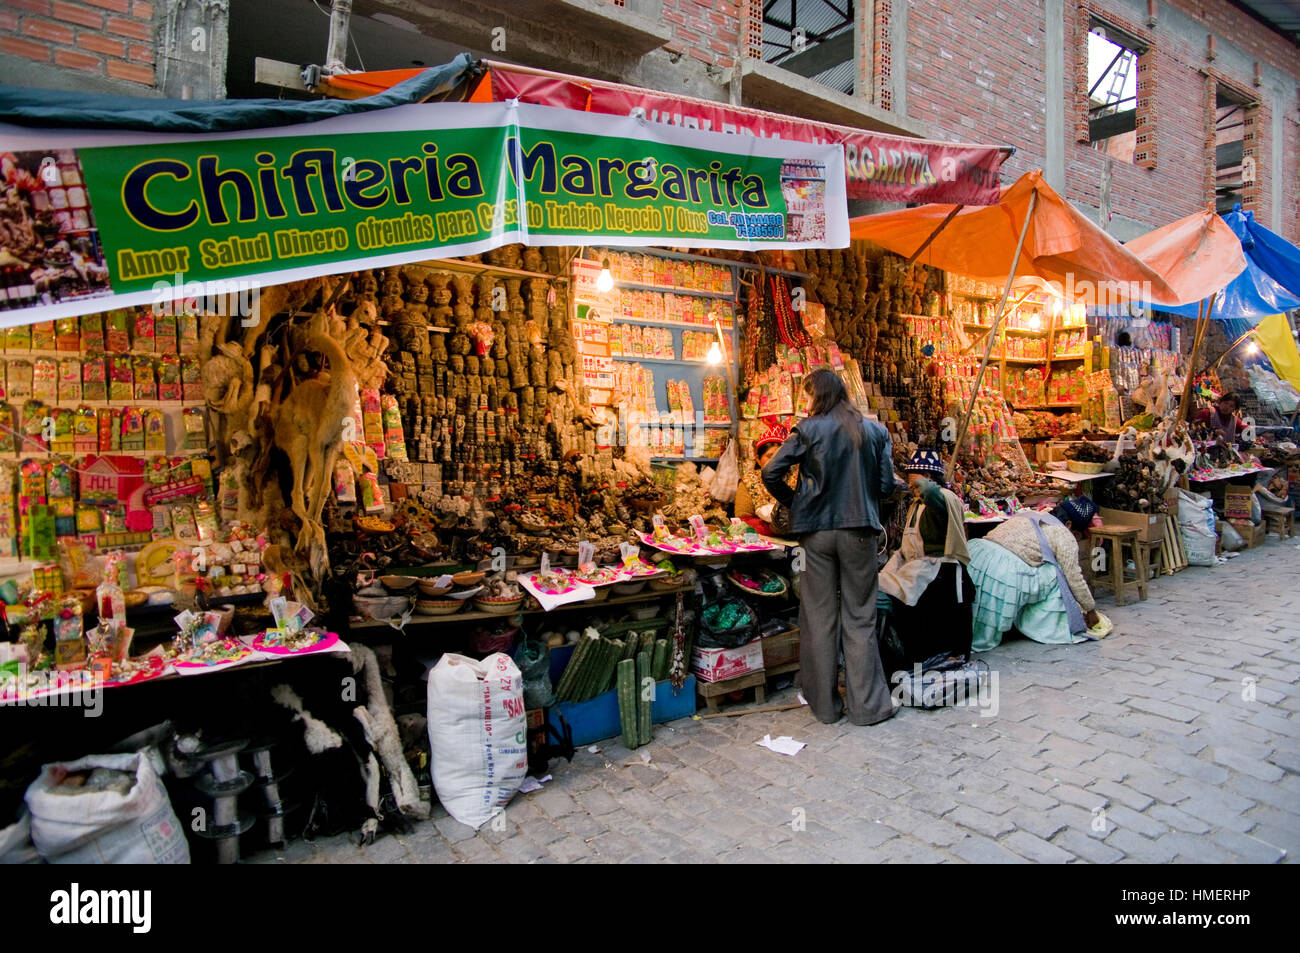 Photo of chiflera Margarita's stall in the Witches Market in La Paz, Bolivia, taken in 2009.. Some items are now illegal Stock Photo